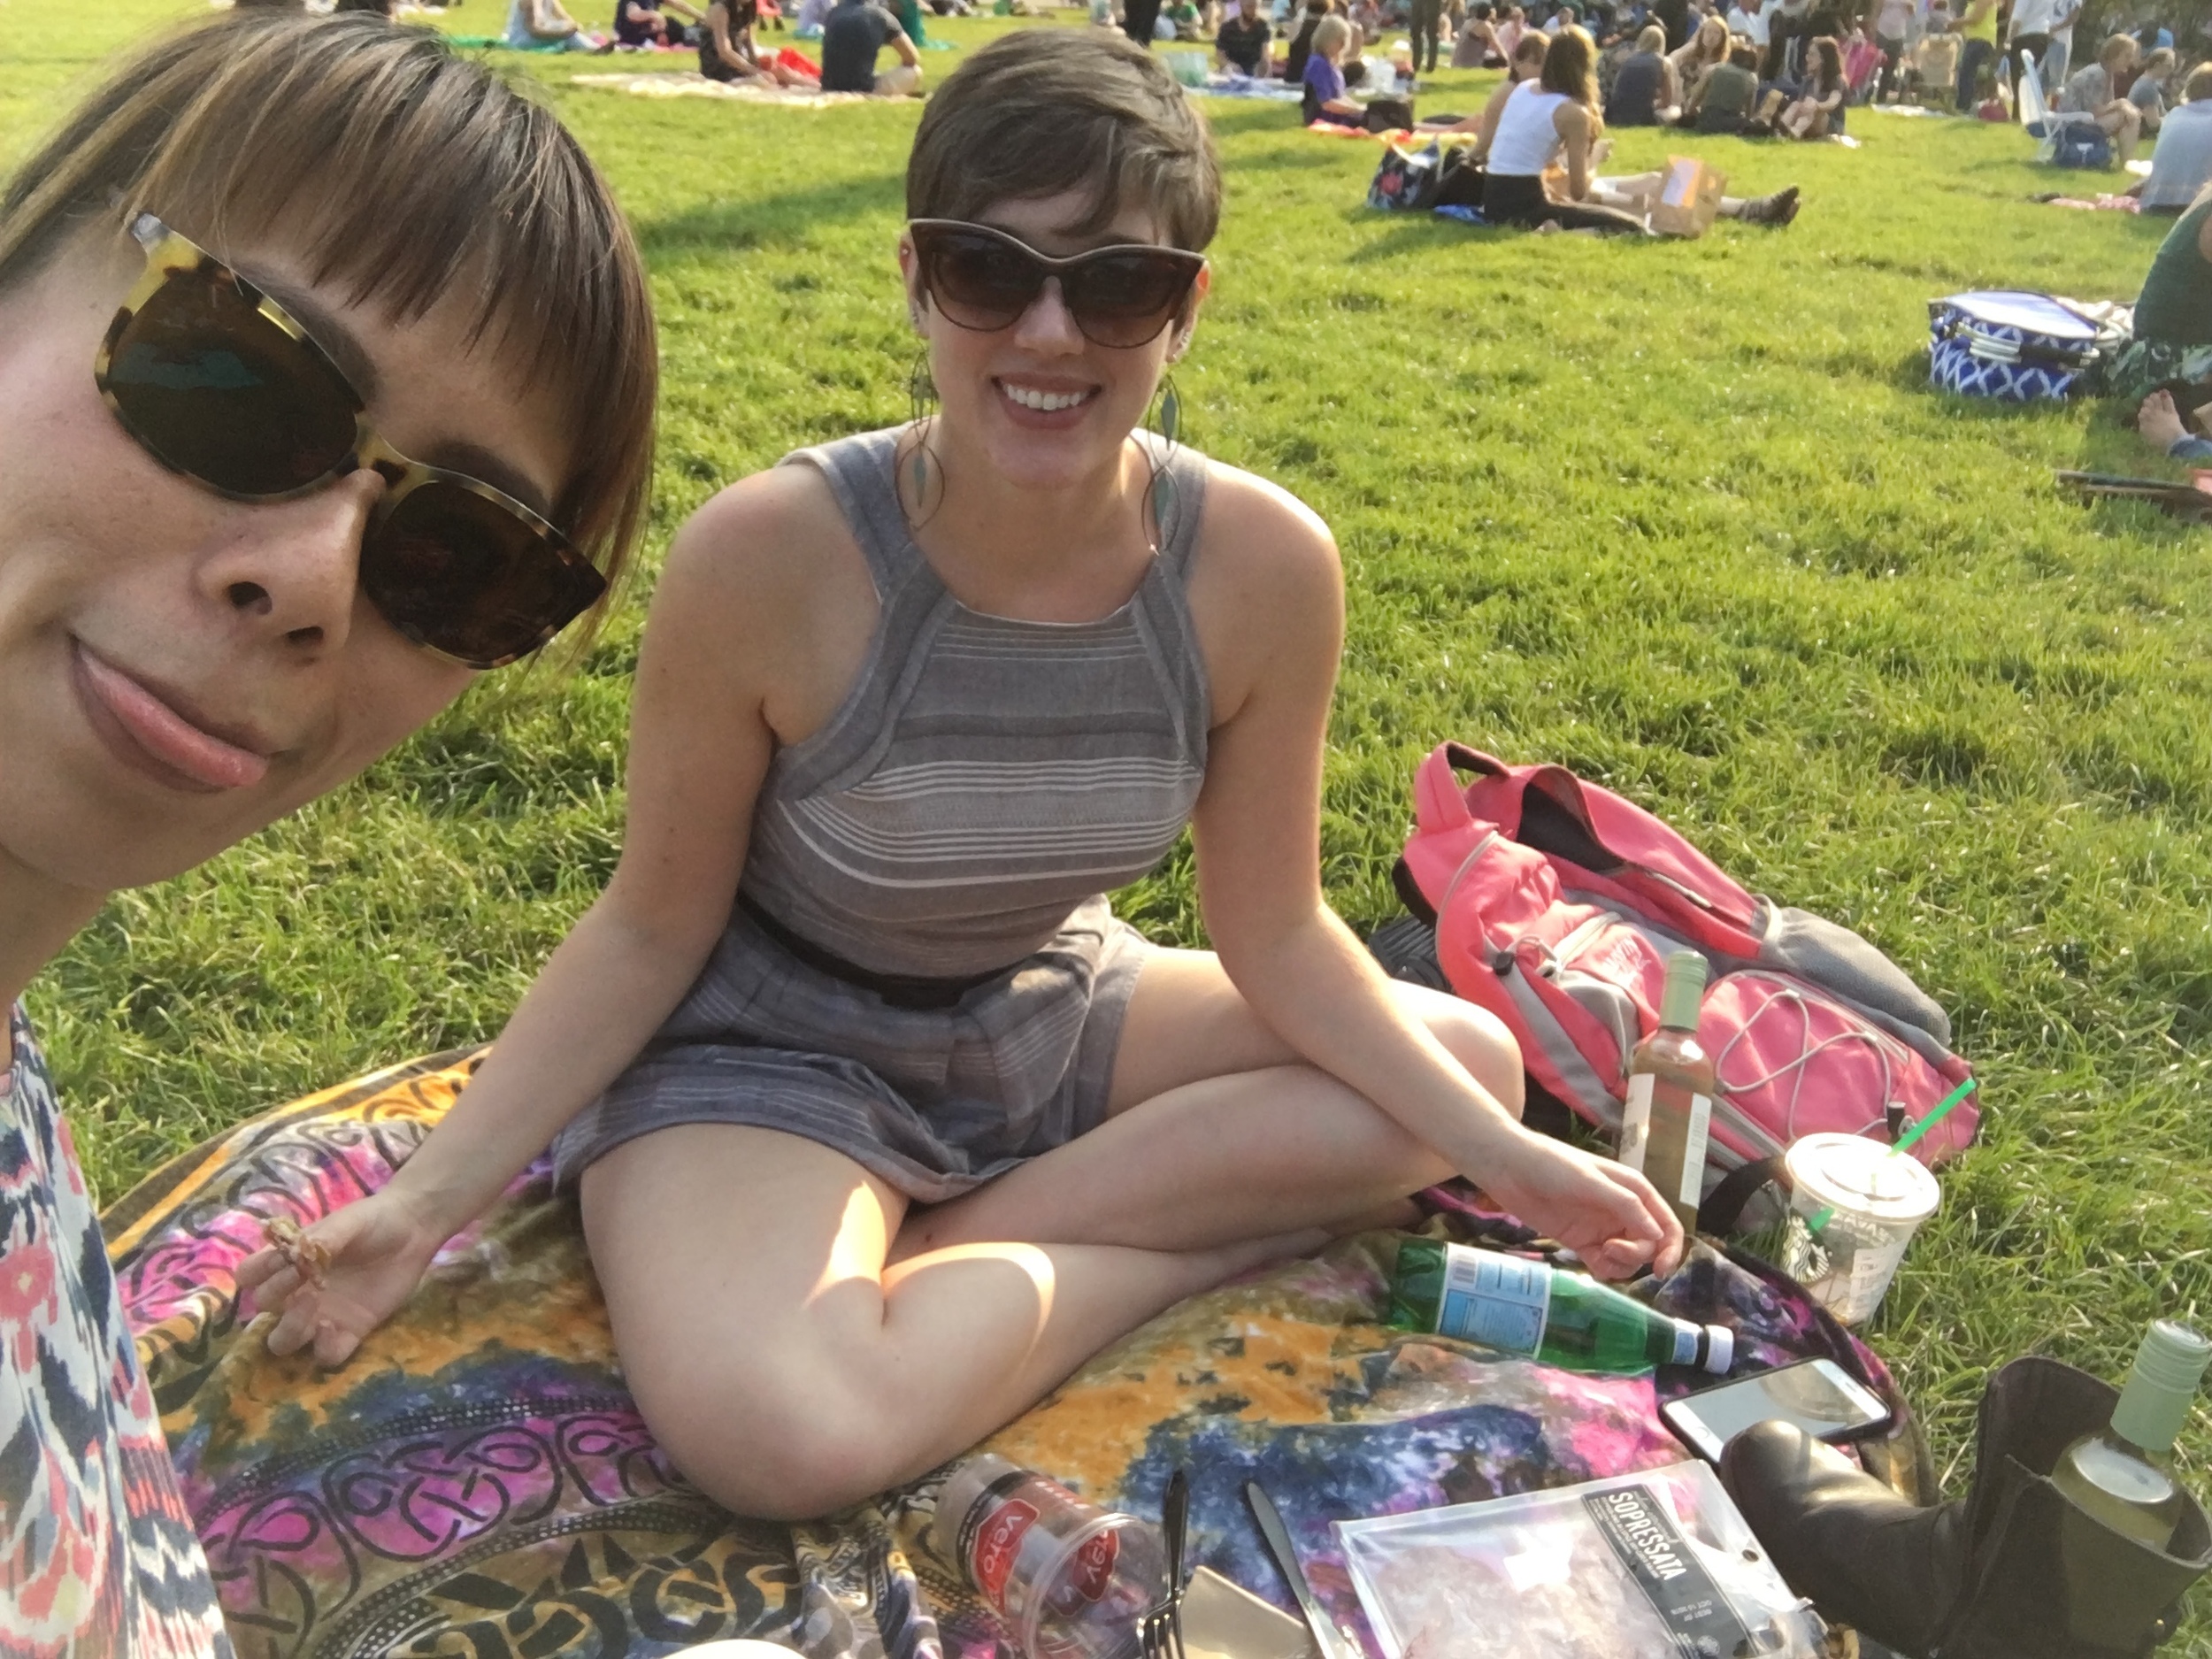 At Millennial Park waiting for concert to start